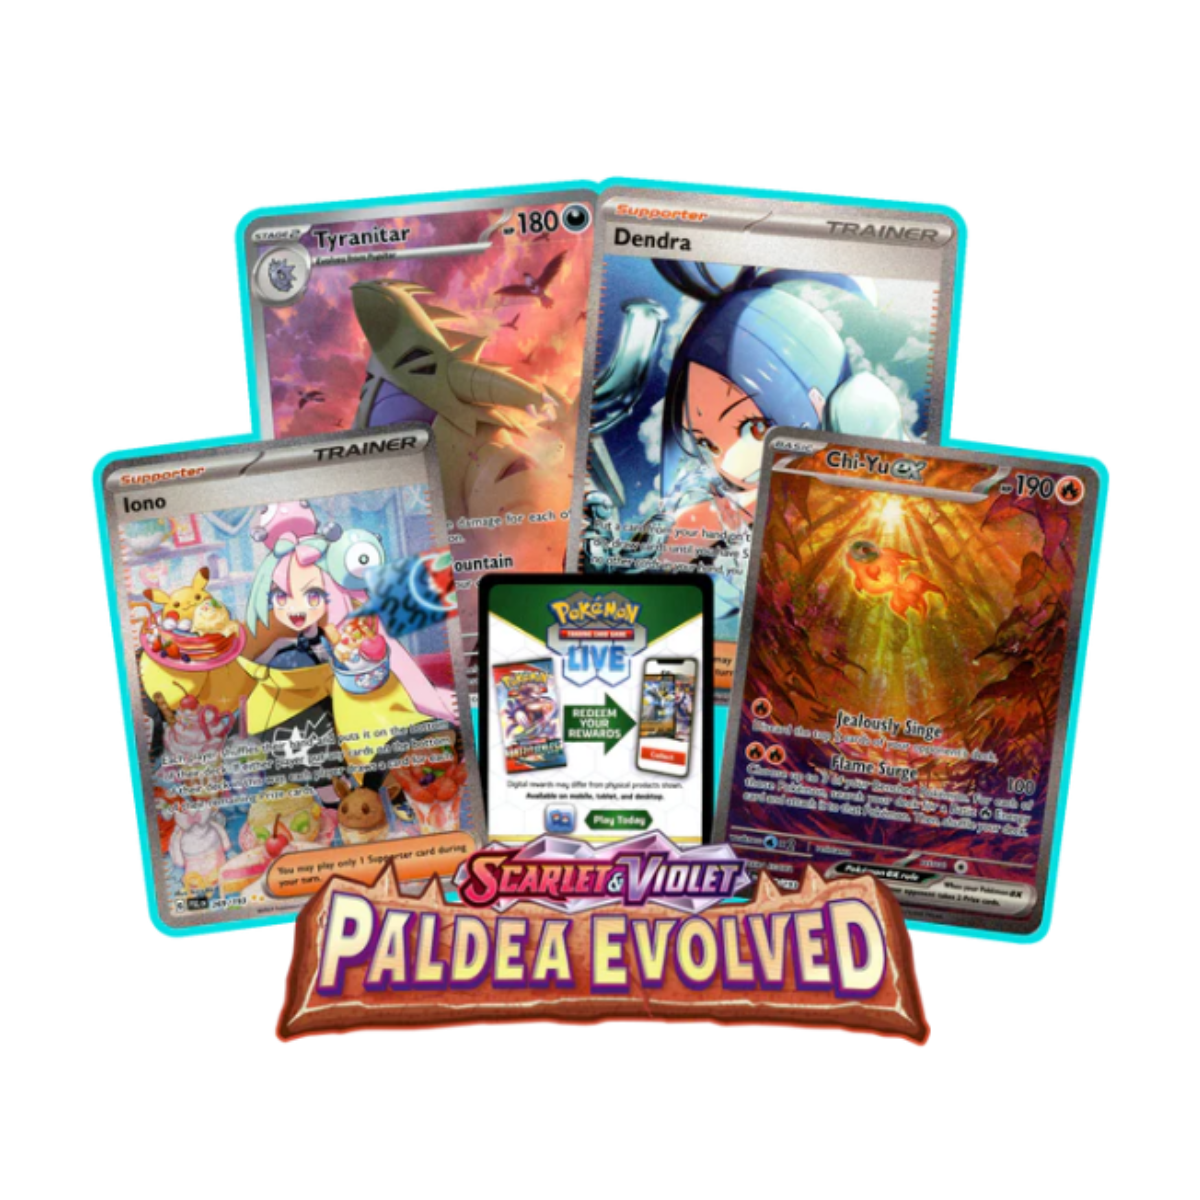 Paldea Evolved PTCGO Code - Booster Pack (FOR THE ONLINE POKEMON GAME)